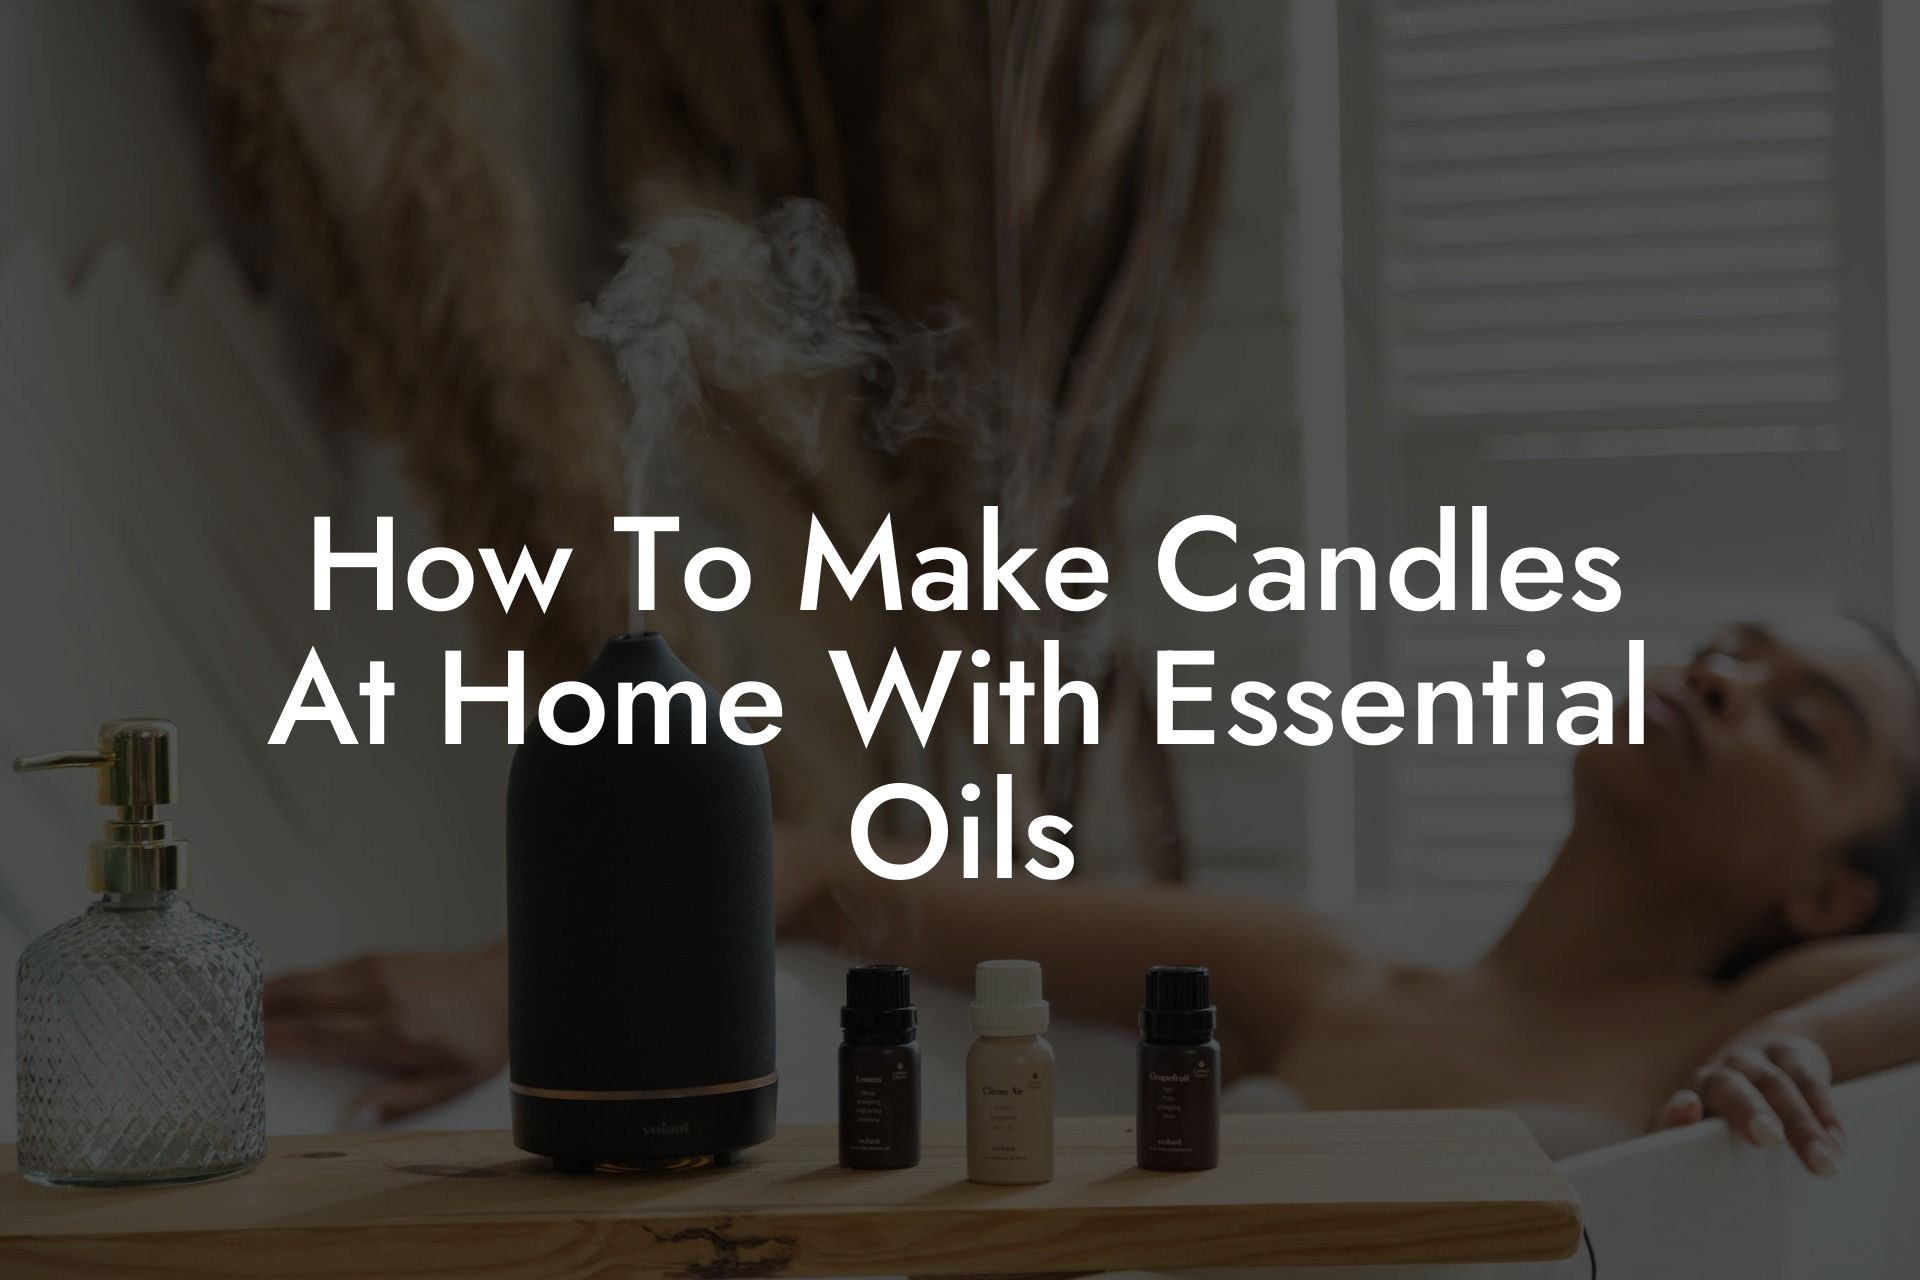 How To Make Candles At Home With Essential Oils